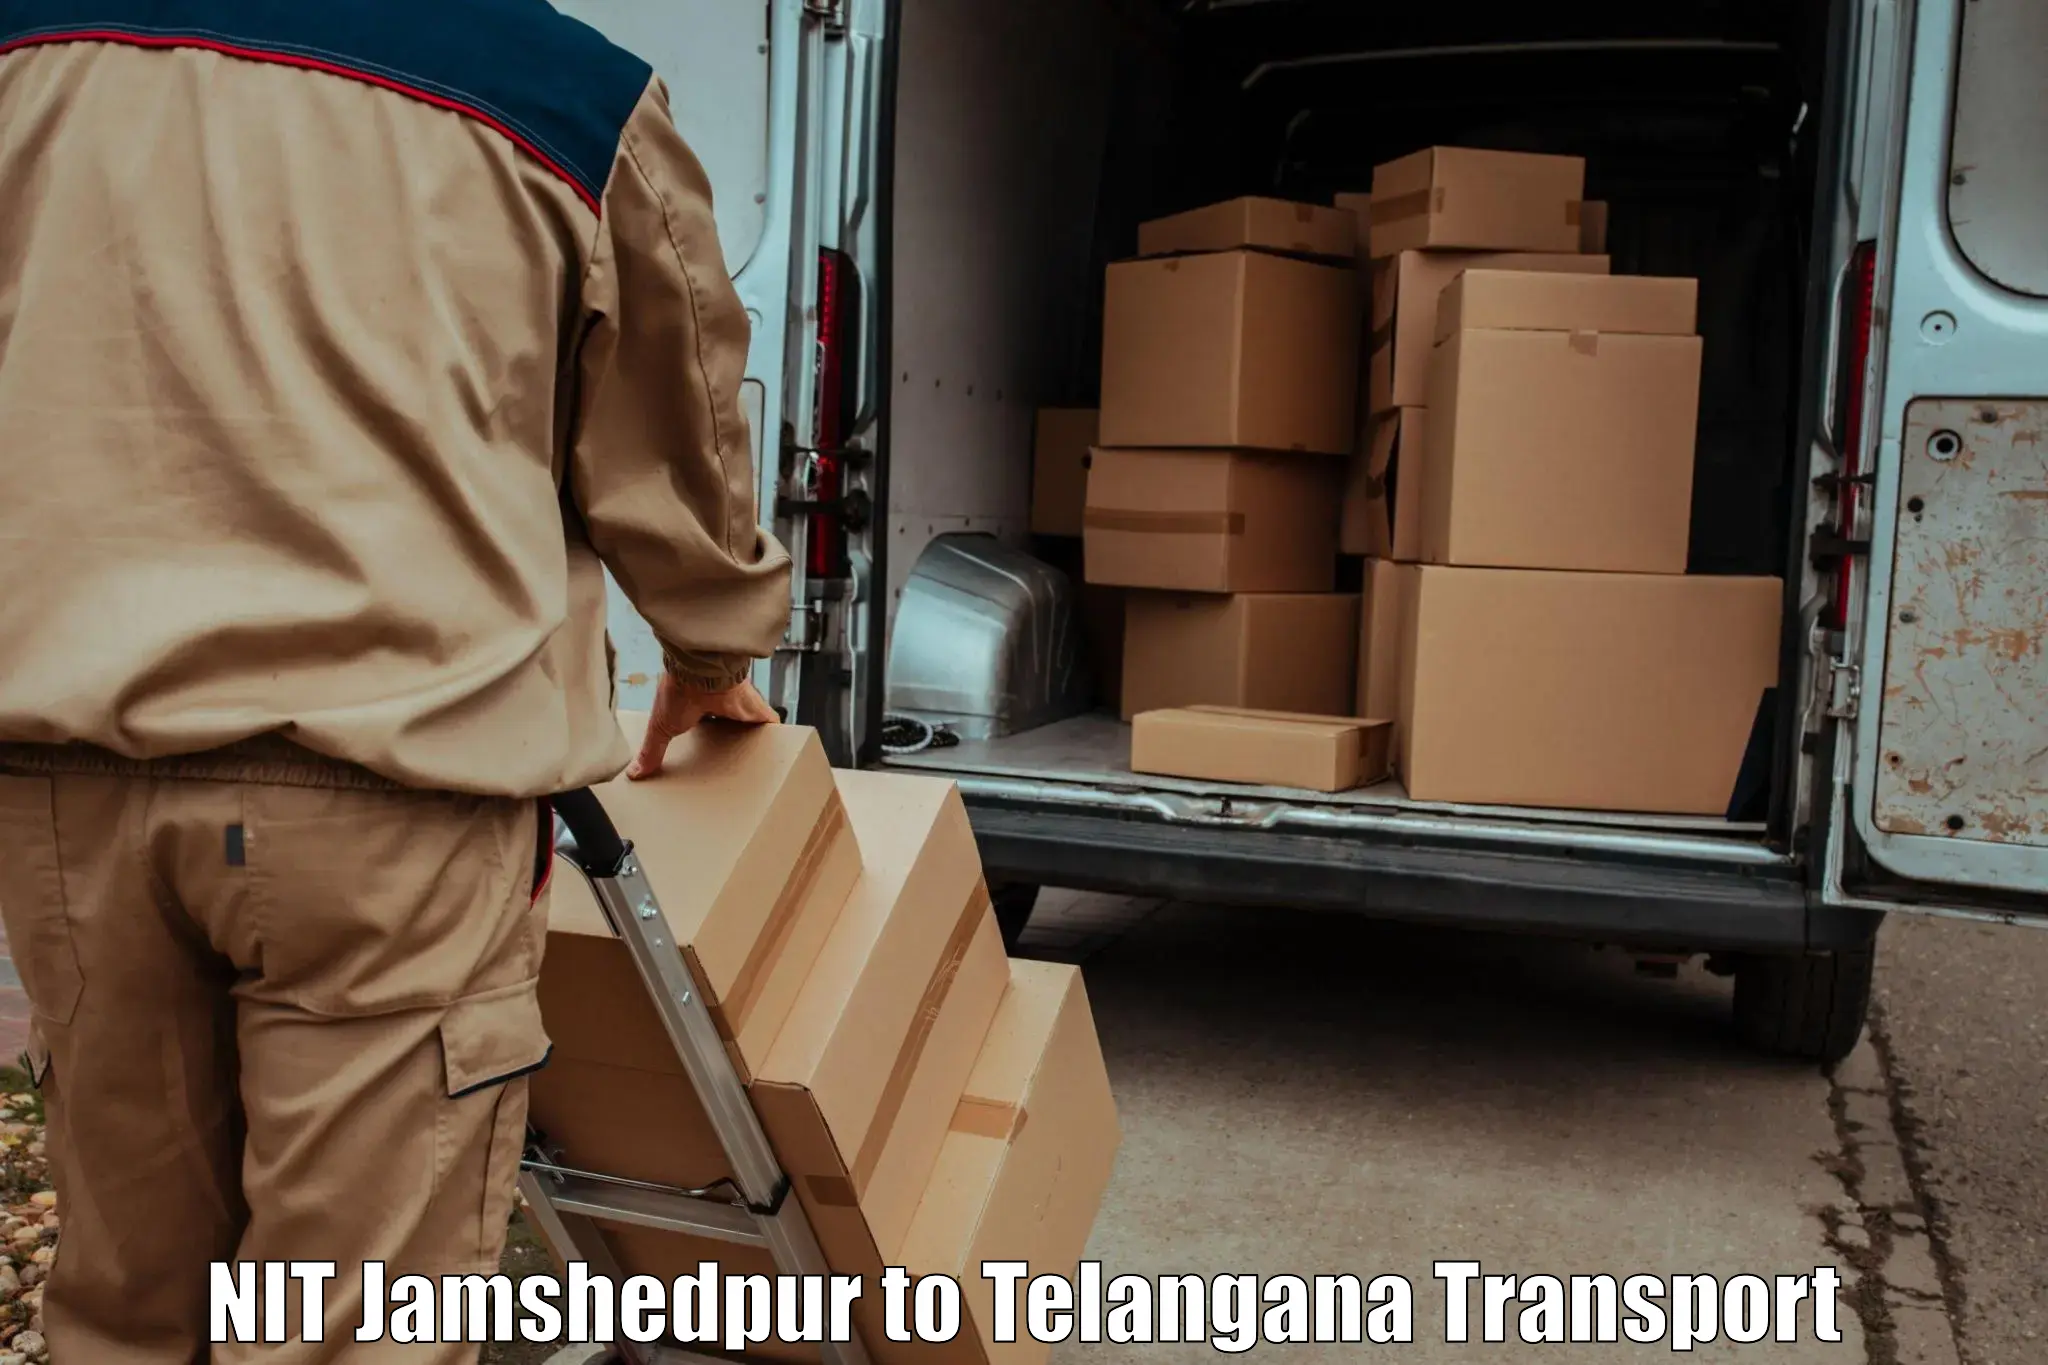 Air freight transport services NIT Jamshedpur to Banswada